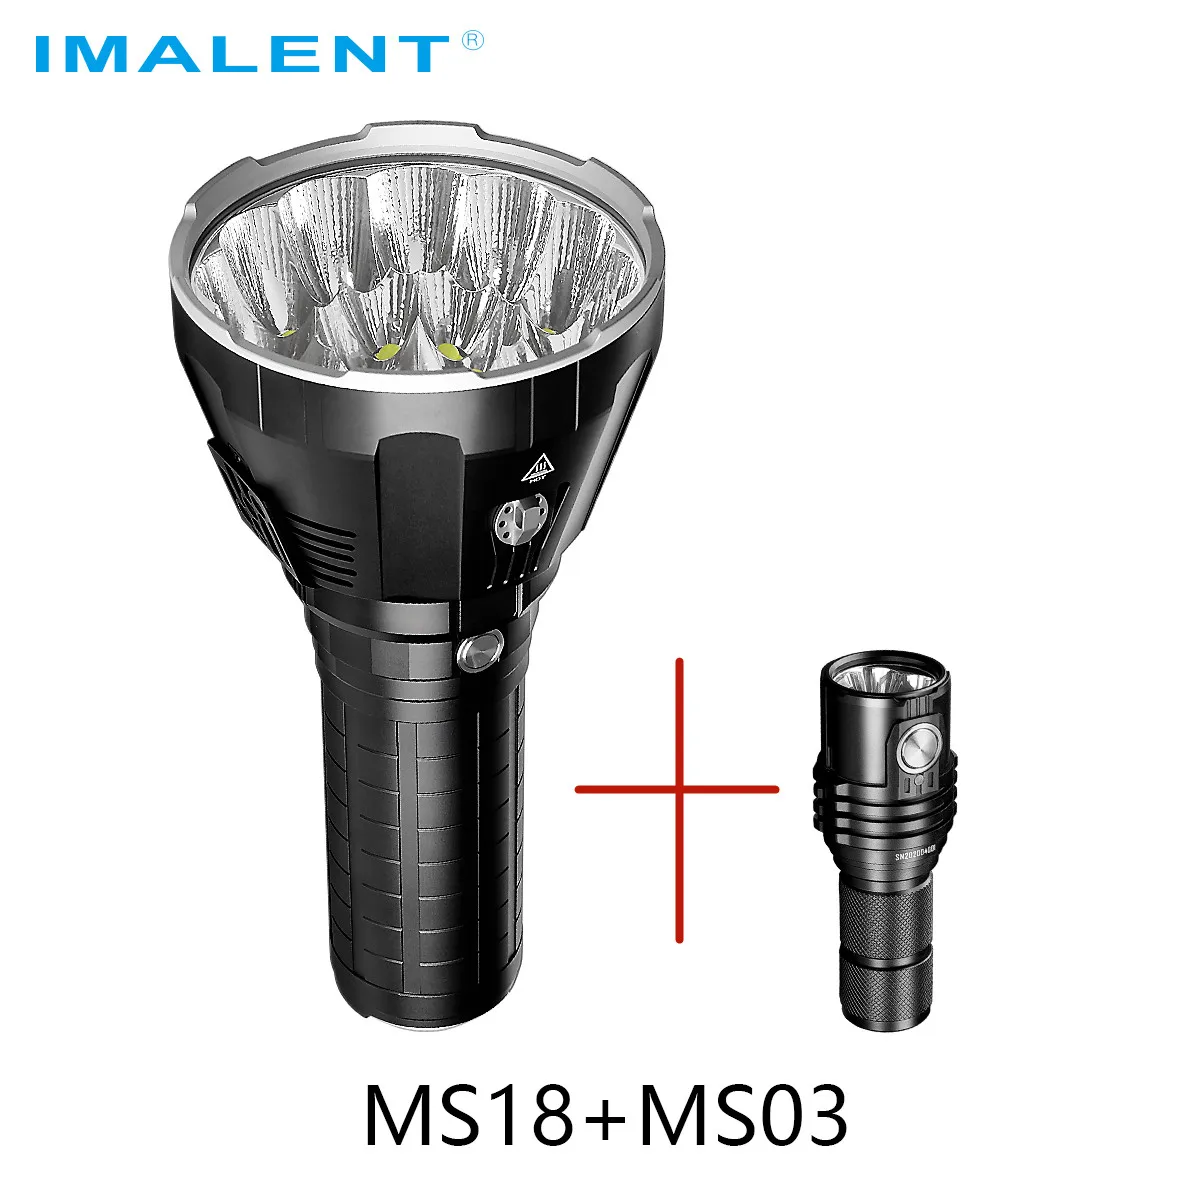 IMALENT MS18 MS03 Powerful Flashlight 100000LM CREE XHP70 2 LEDs Rechargeable Brightest Professional Torch for Hunting